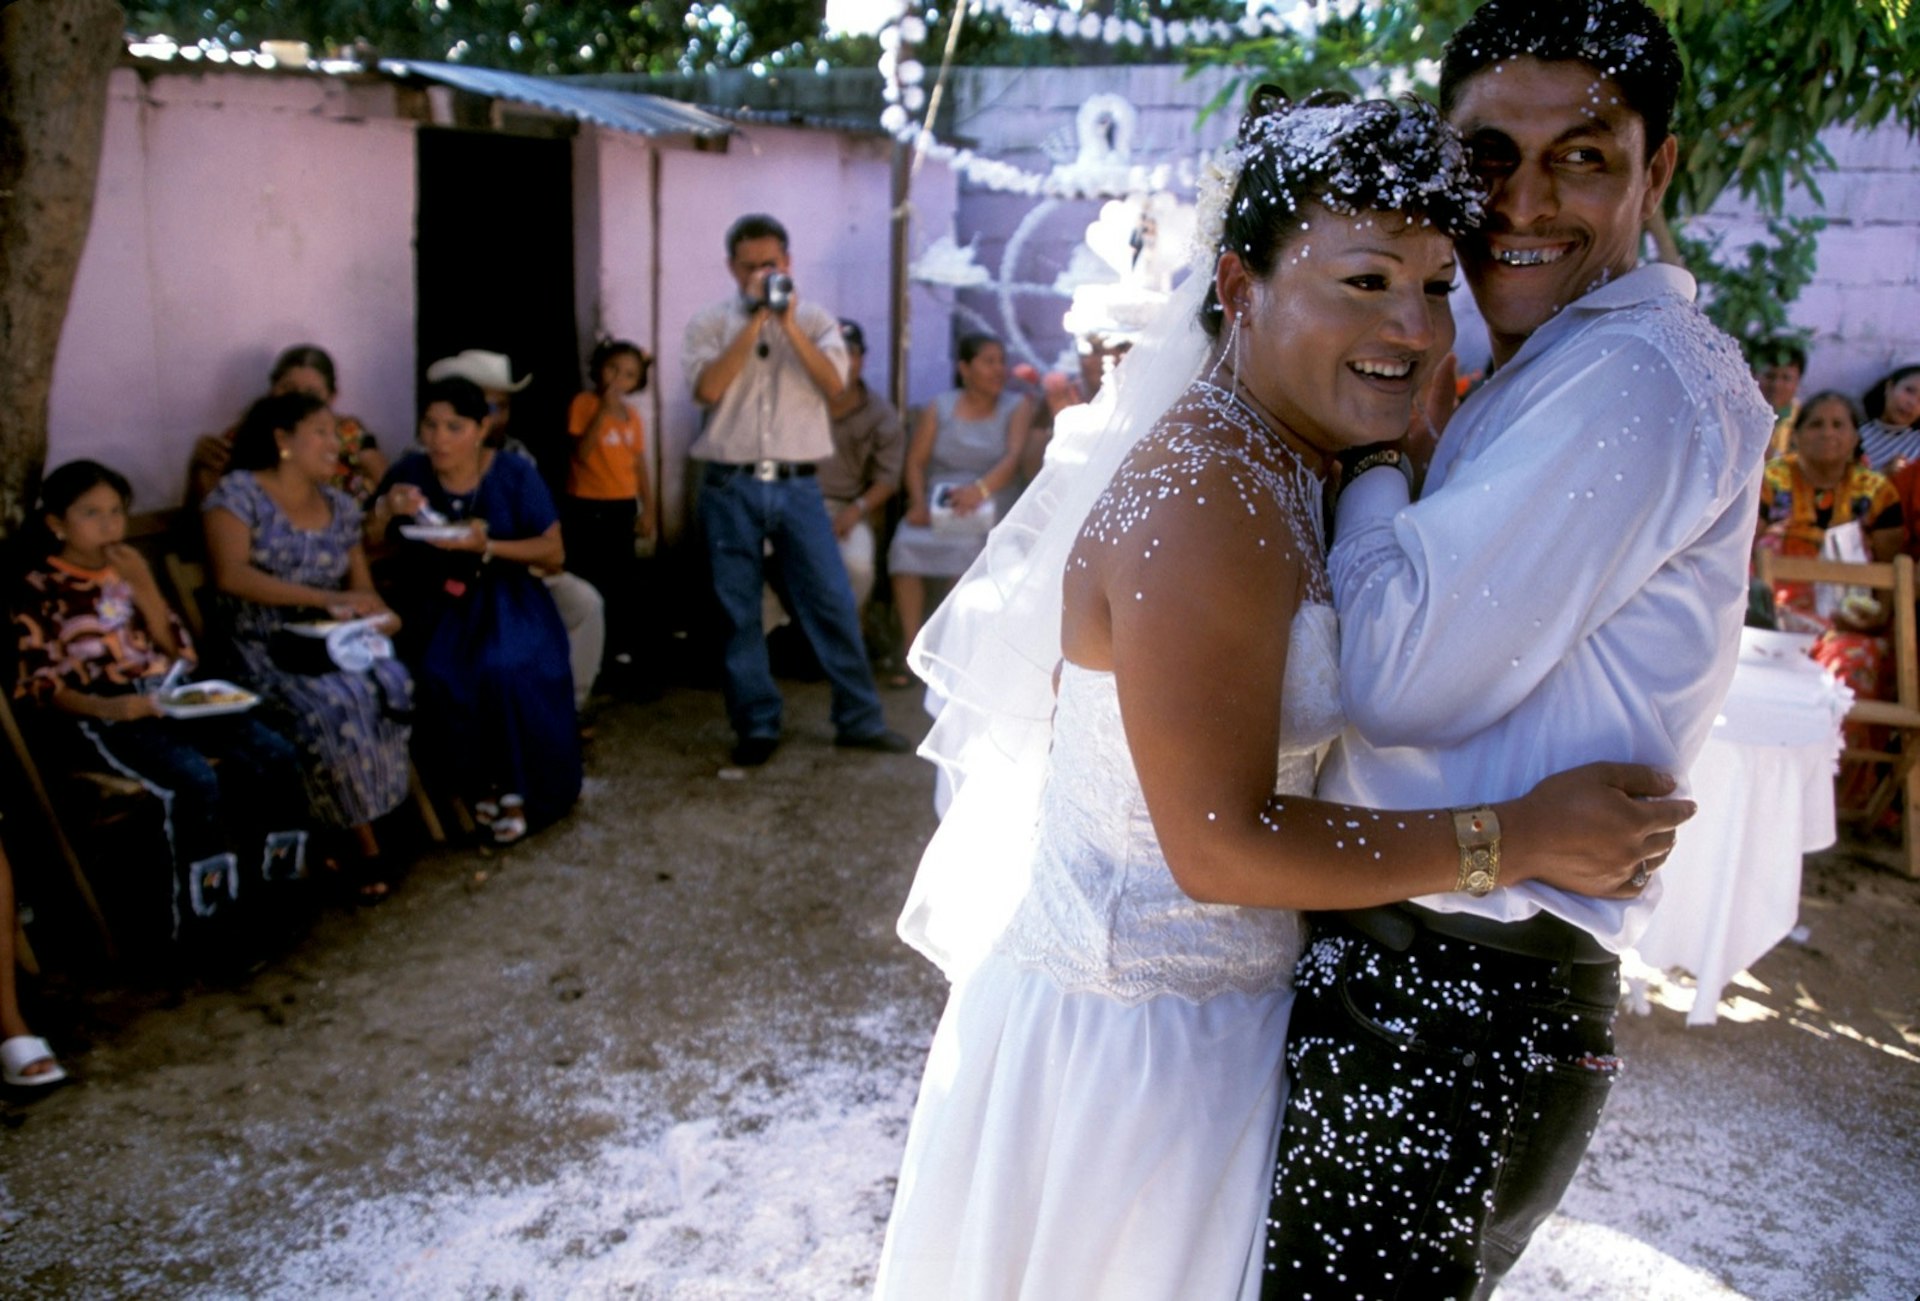 Two men, one dressed in white and the other in a dress shirt and pants hug at their wedding being photographed by people sitting on chairs in a courtyard